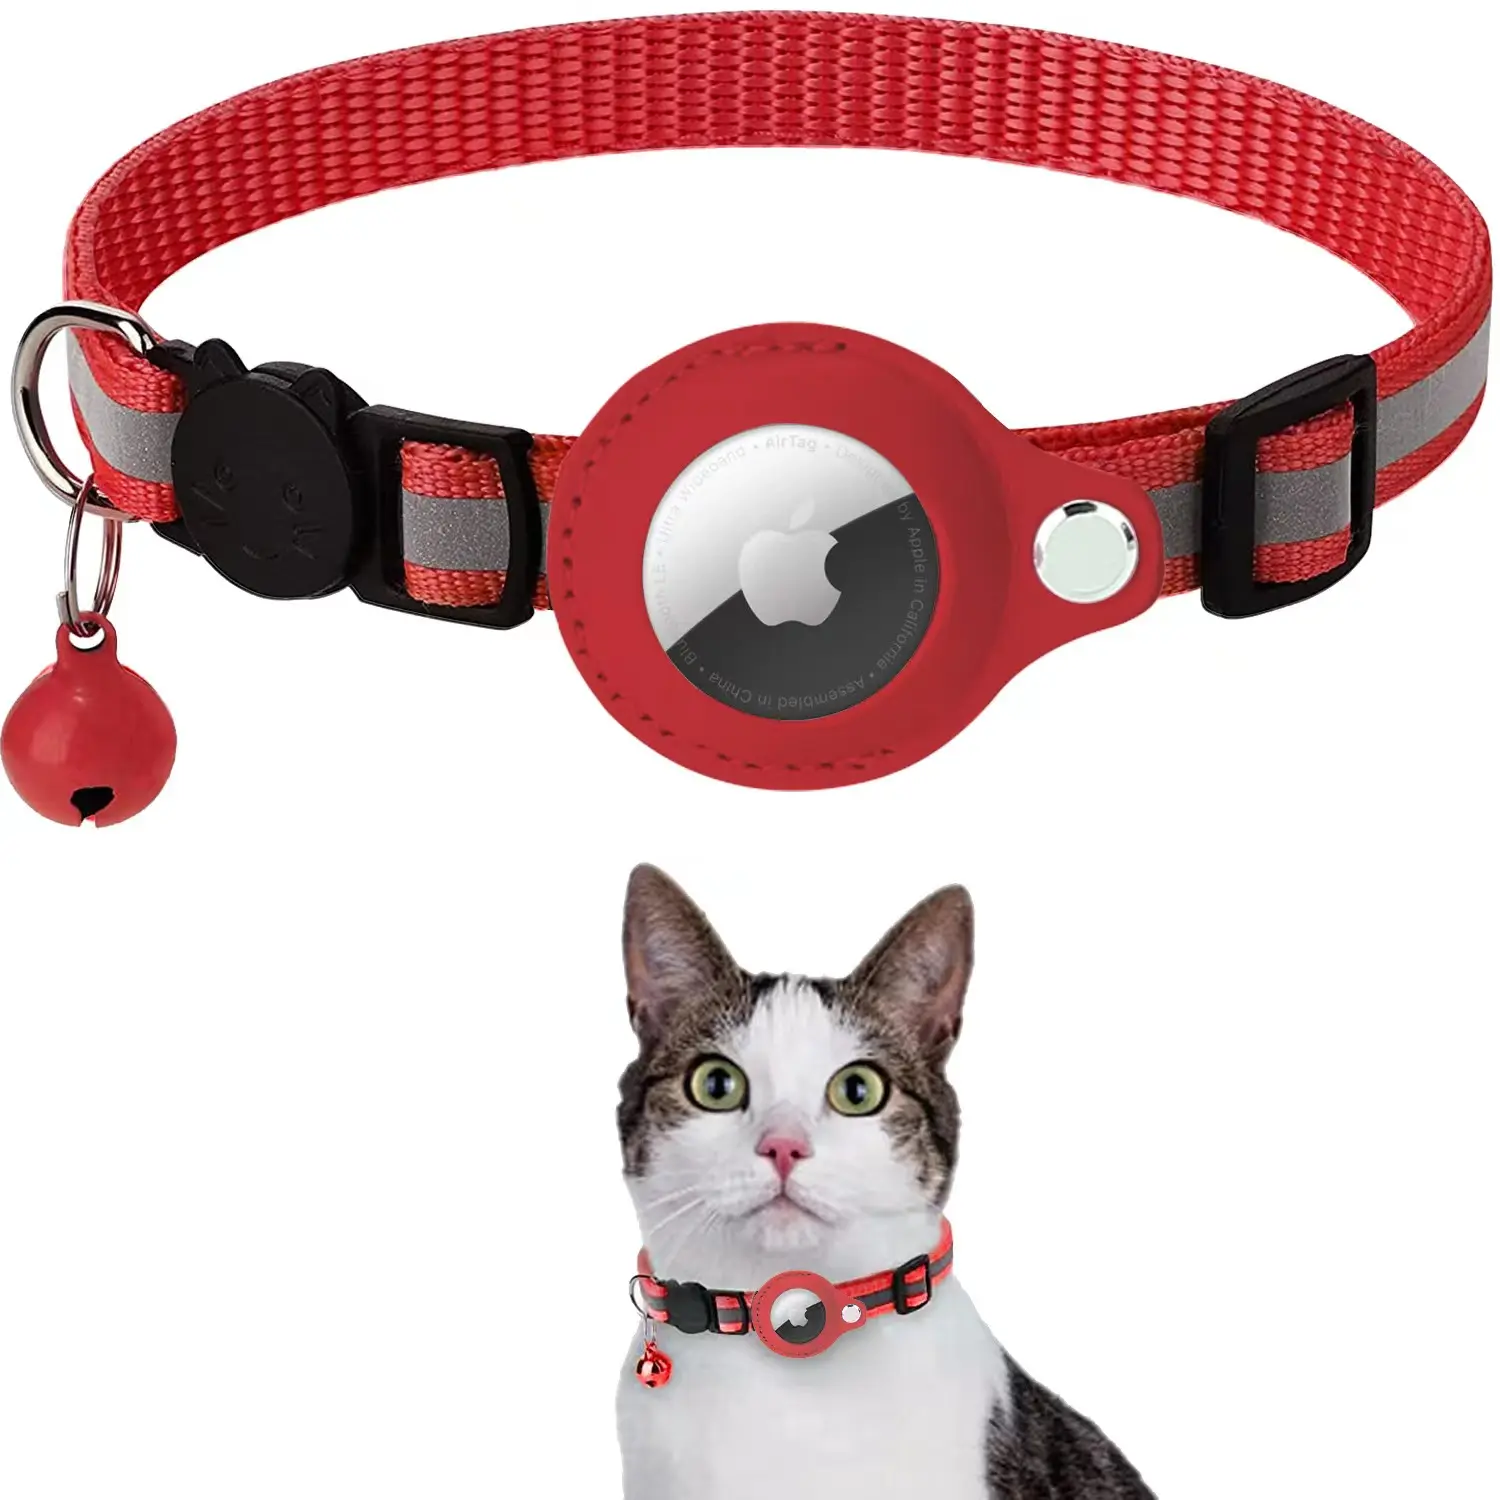 Wholesales Customized Pet Accessories Air tag Pet Decoration Adjustable Airtag Dog Collar Cat Collar with Good Quality